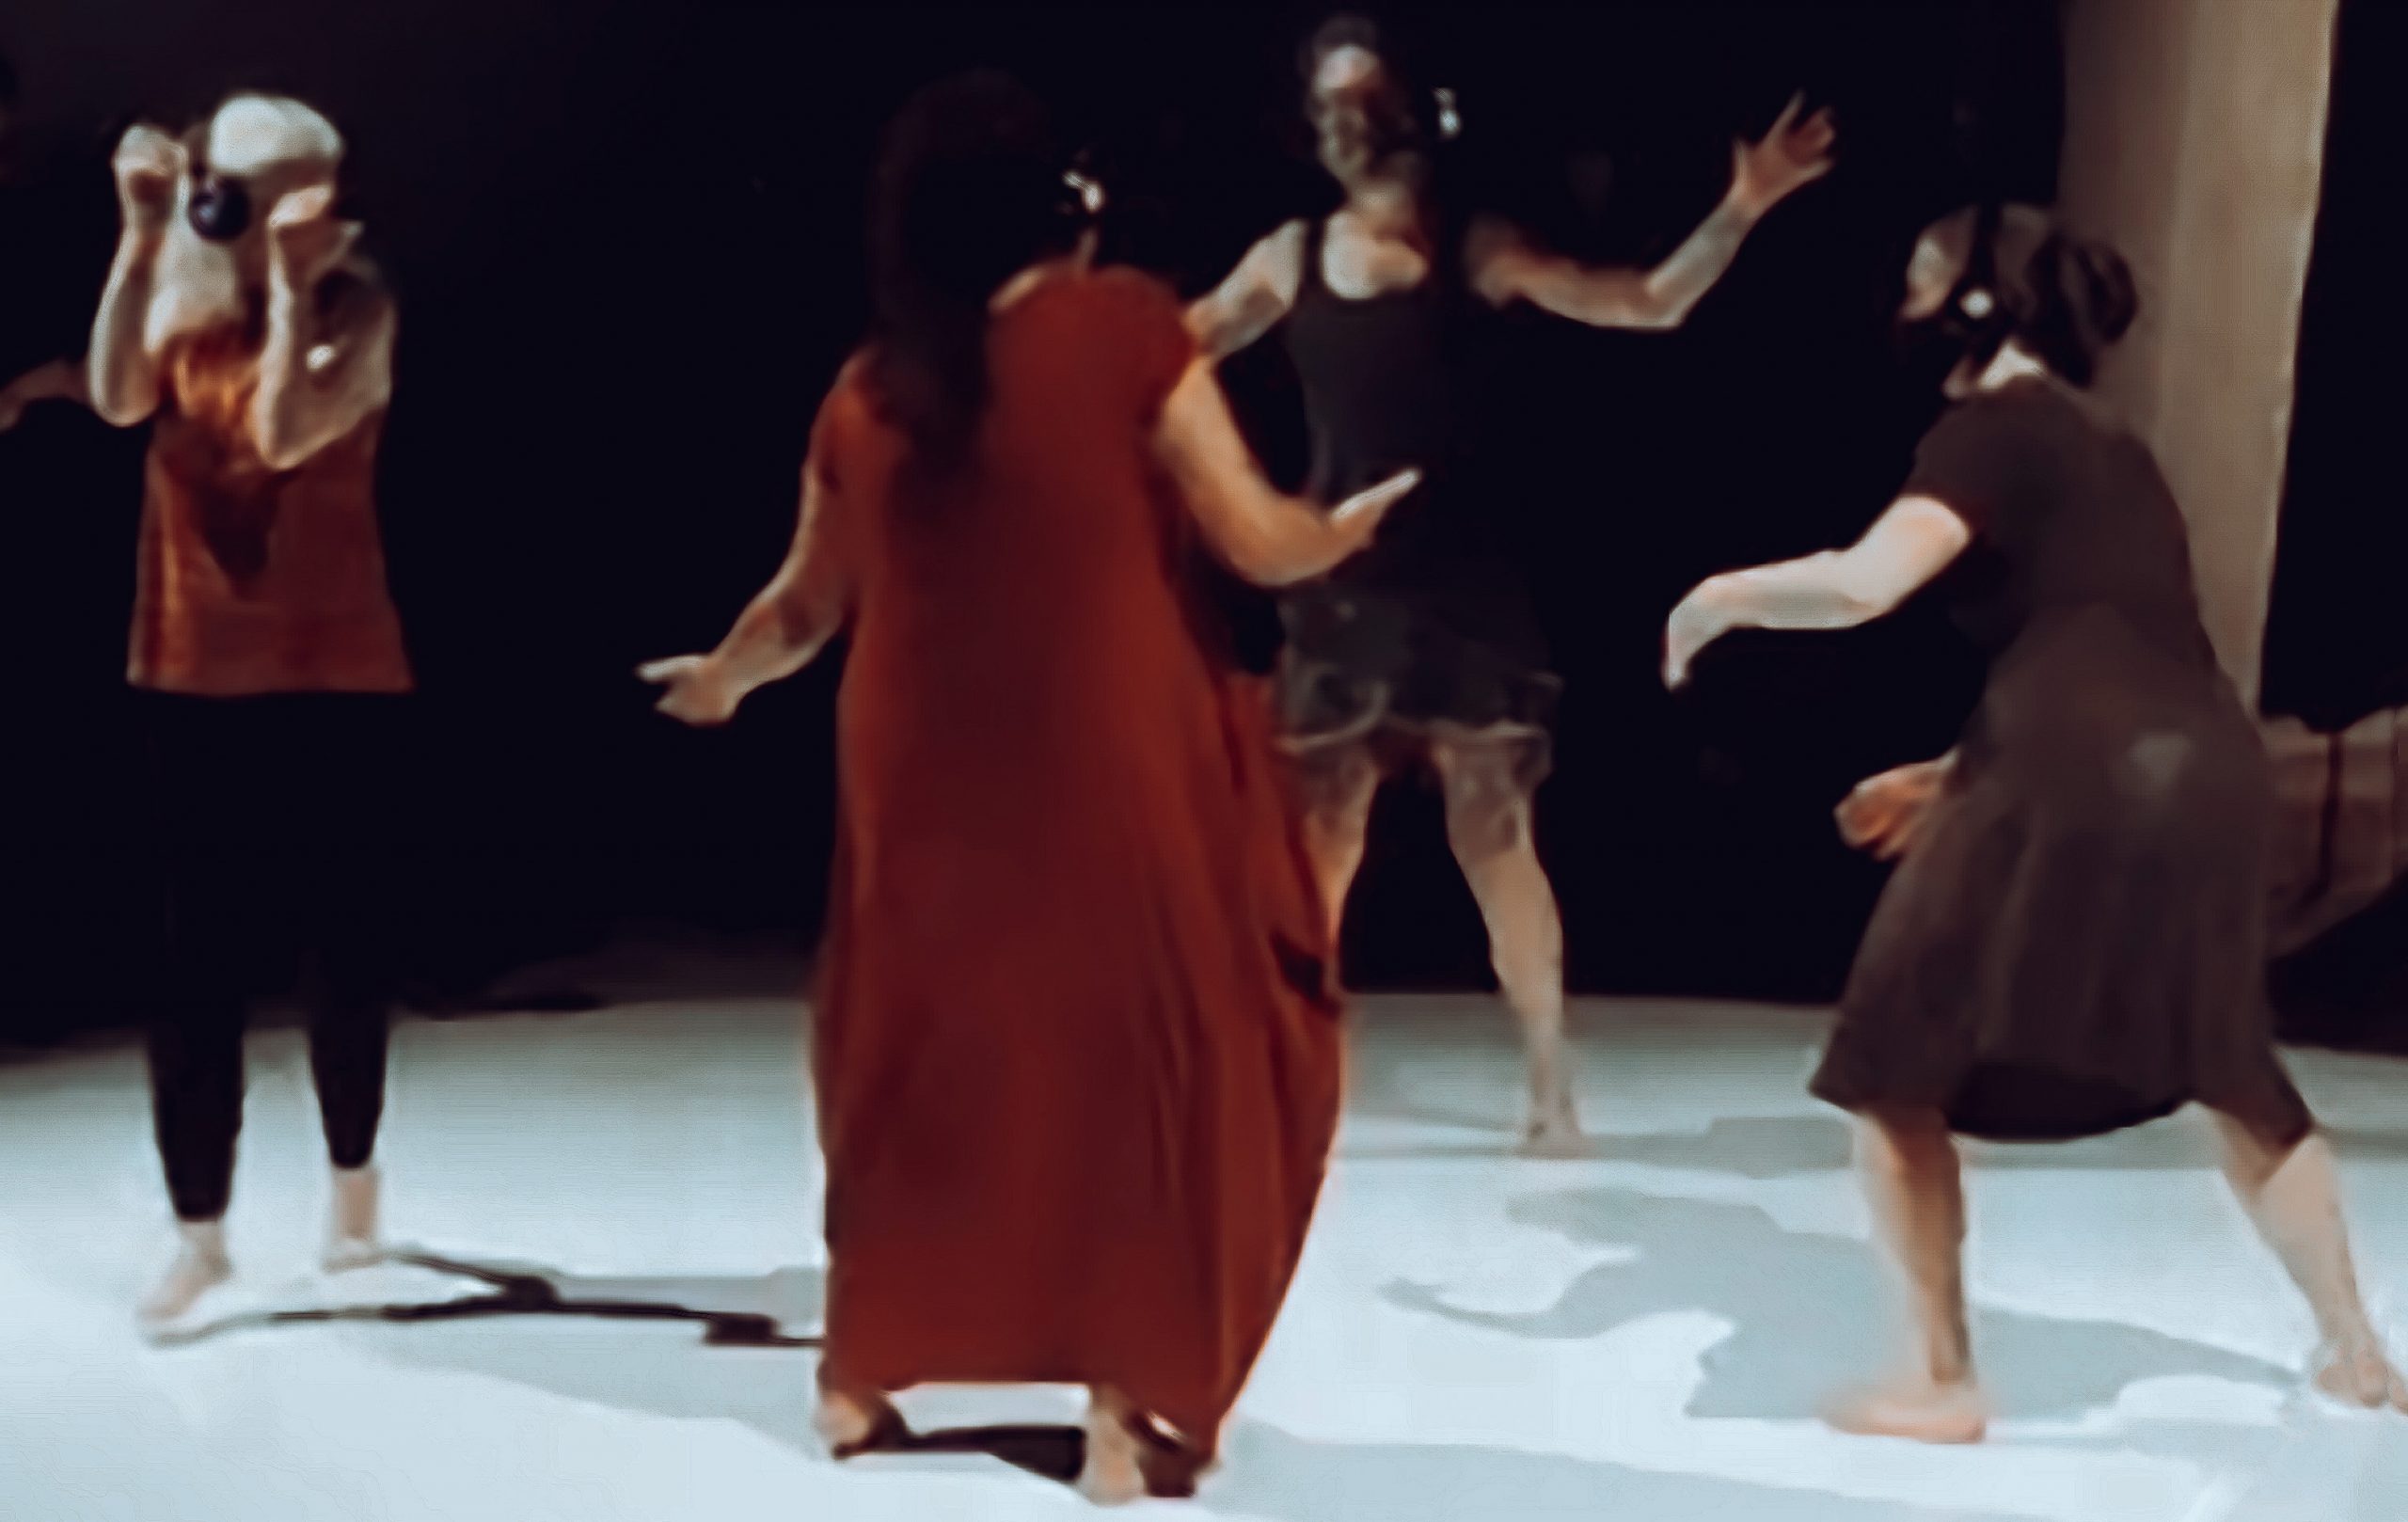 We see four dancers moving on a circular white dance floor, with their shadows dancing alongside